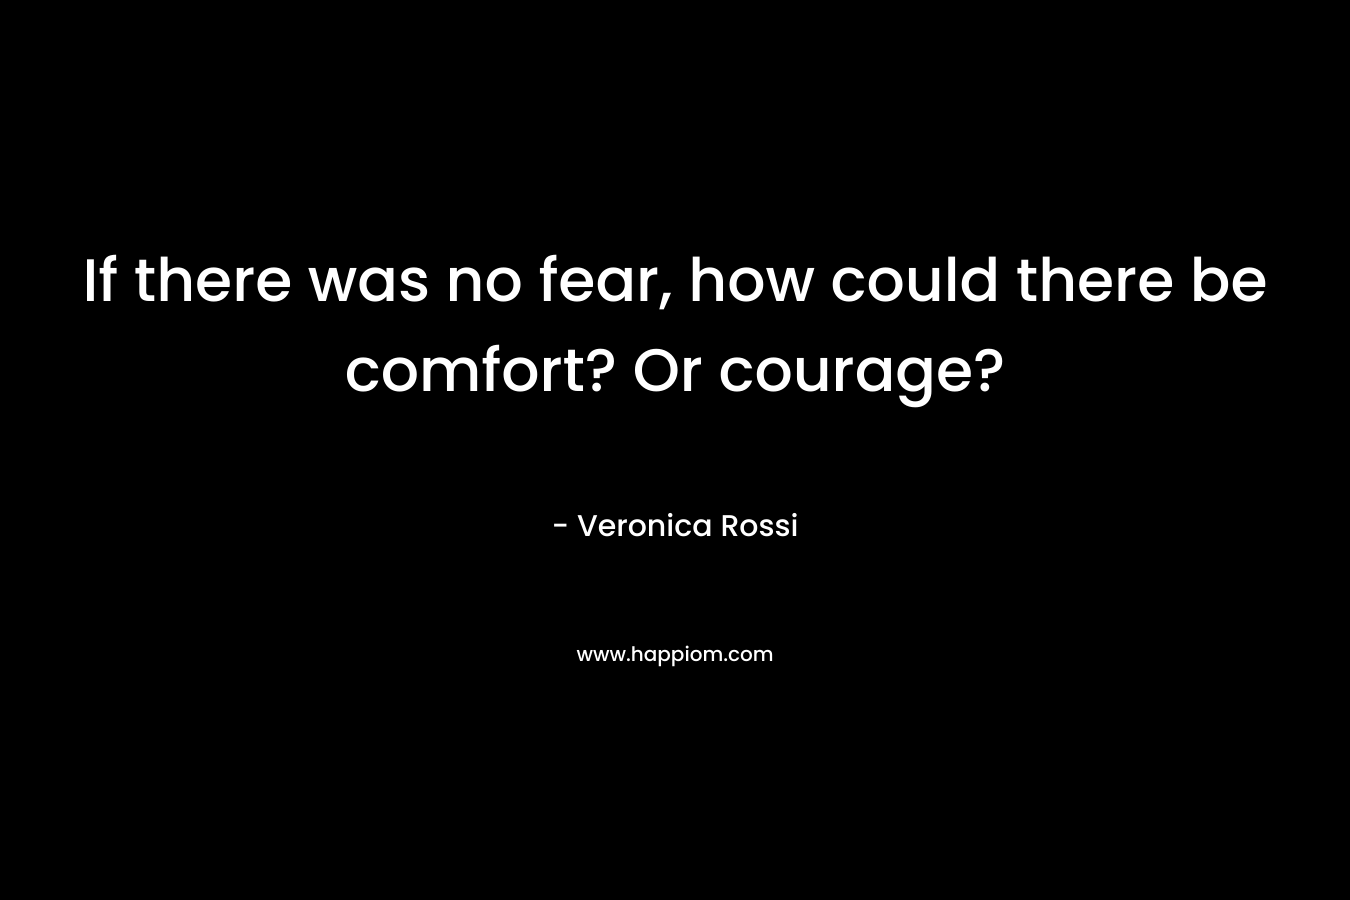 If there was no fear, how could there be comfort? Or courage? – Veronica Rossi